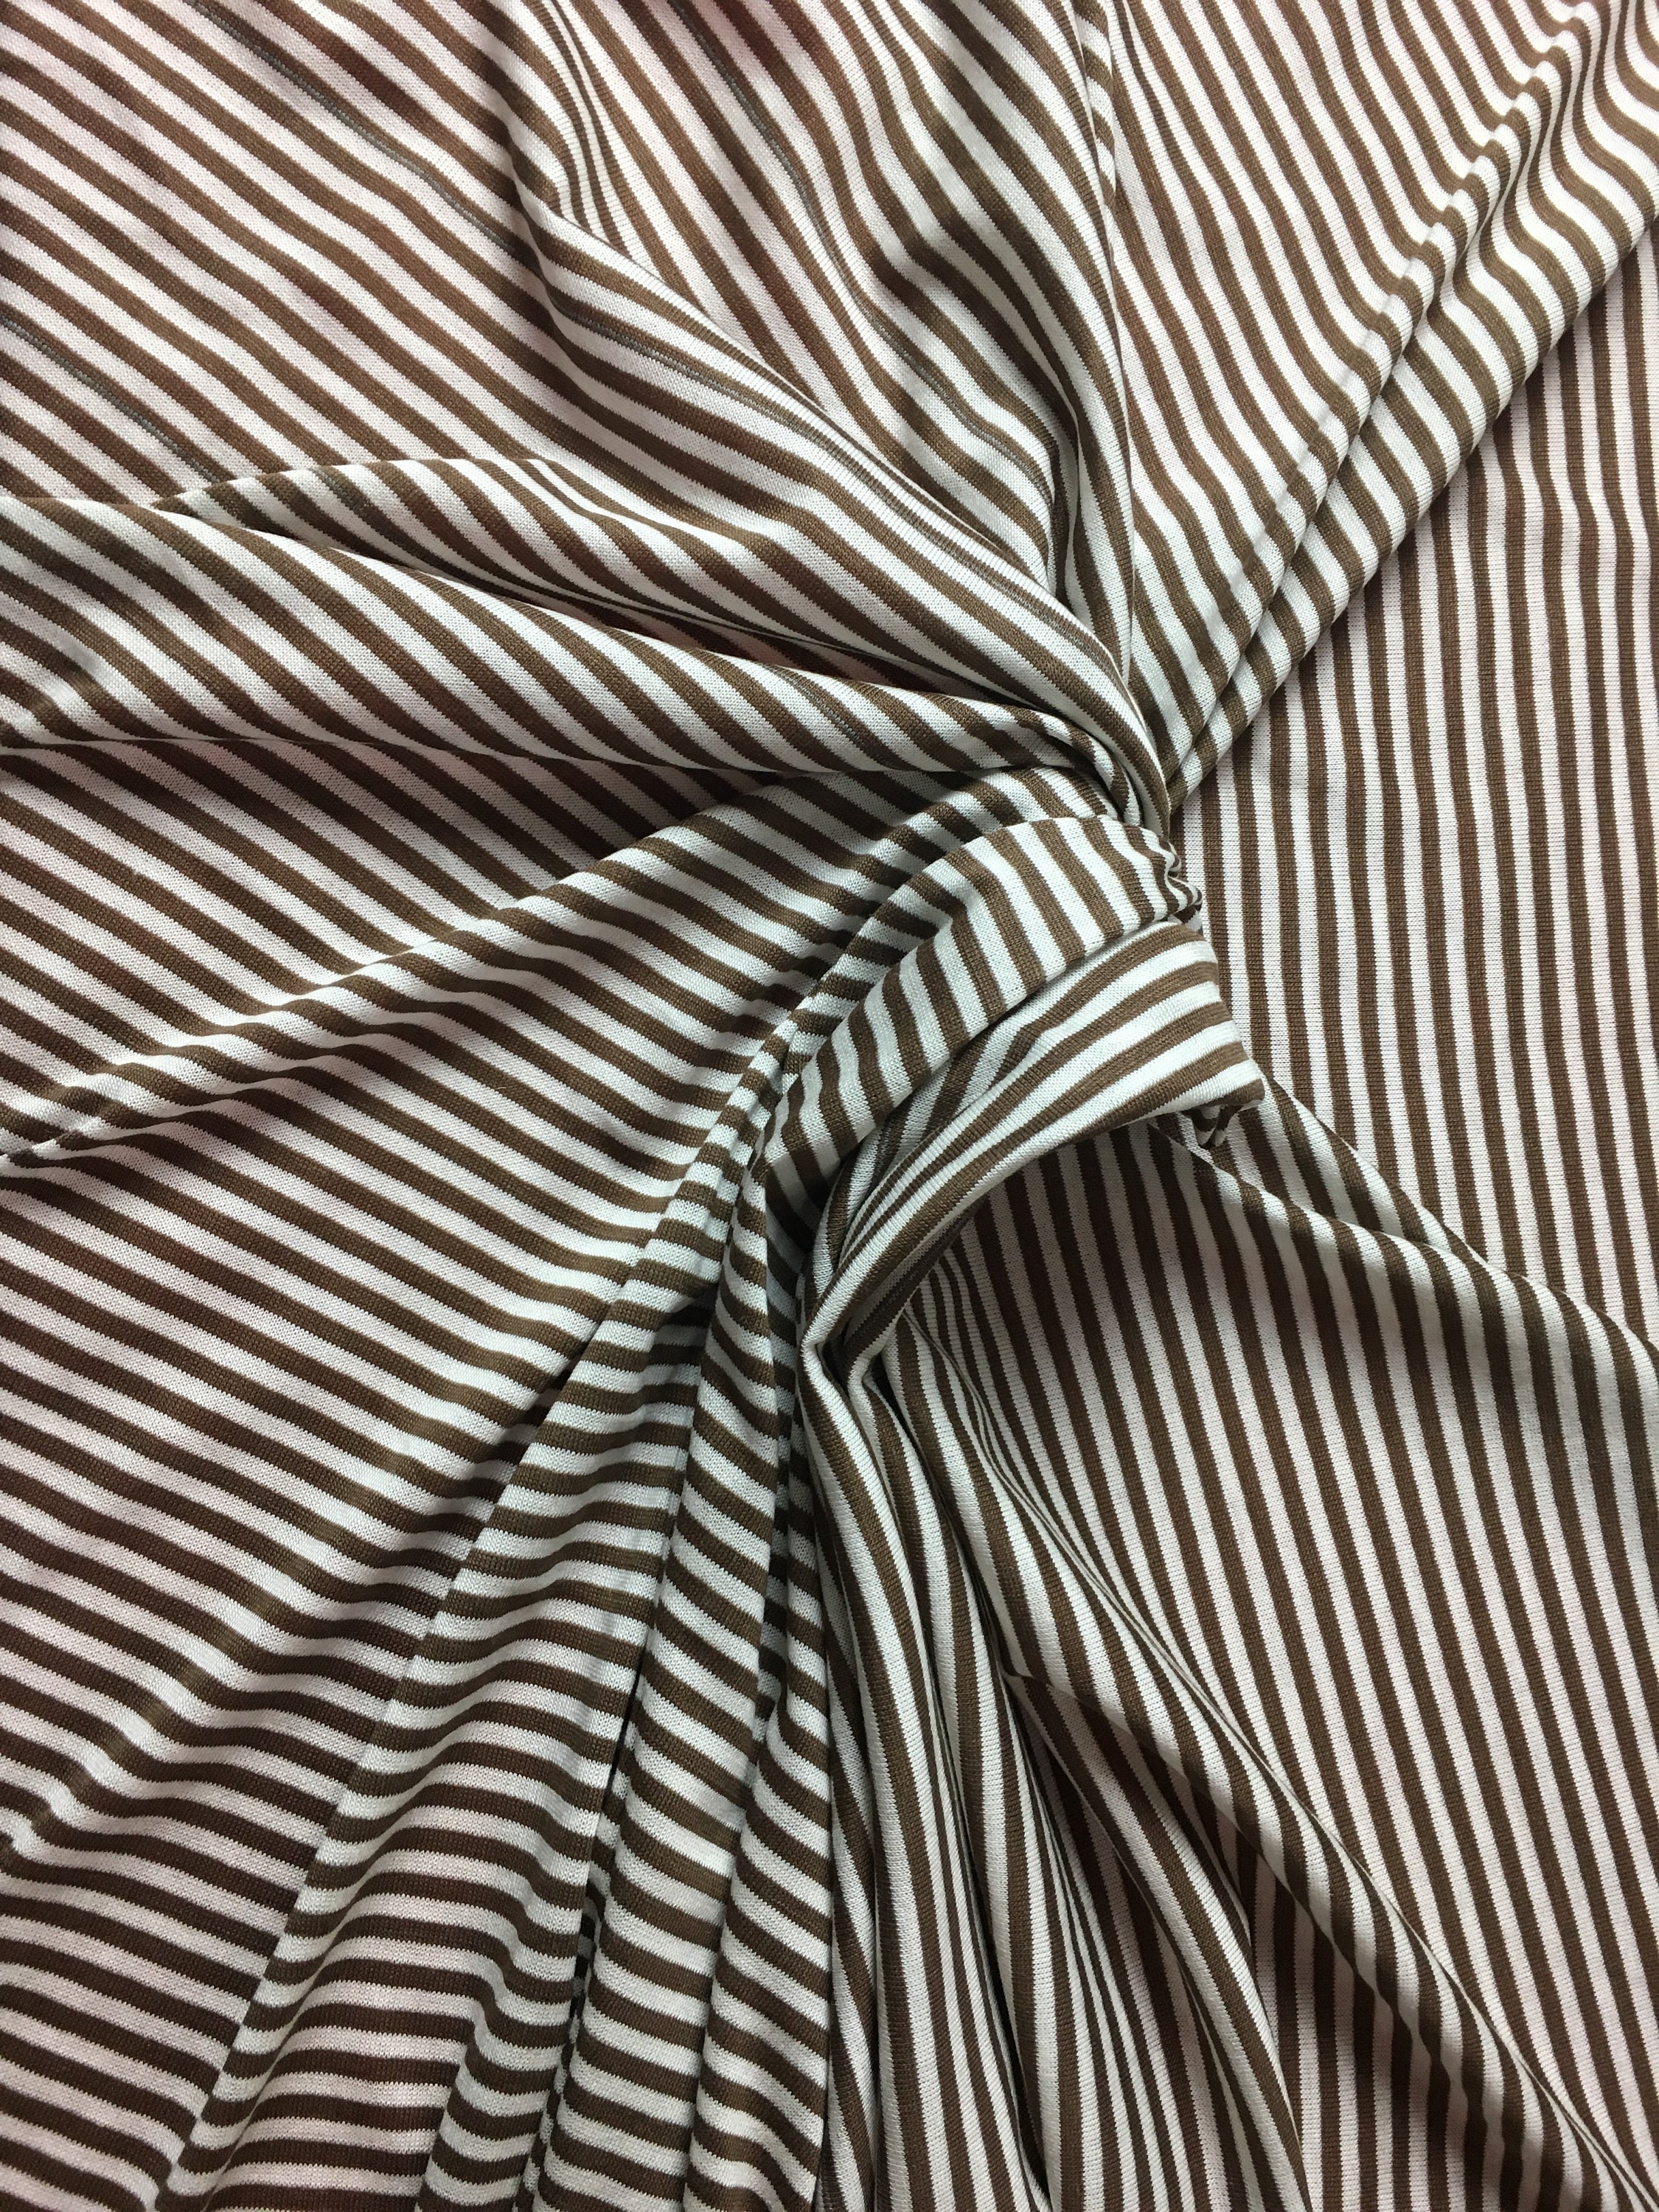 Stripe Cotton Jersey Knit Fabric Sold by Metre, White and Brown, Soft ...